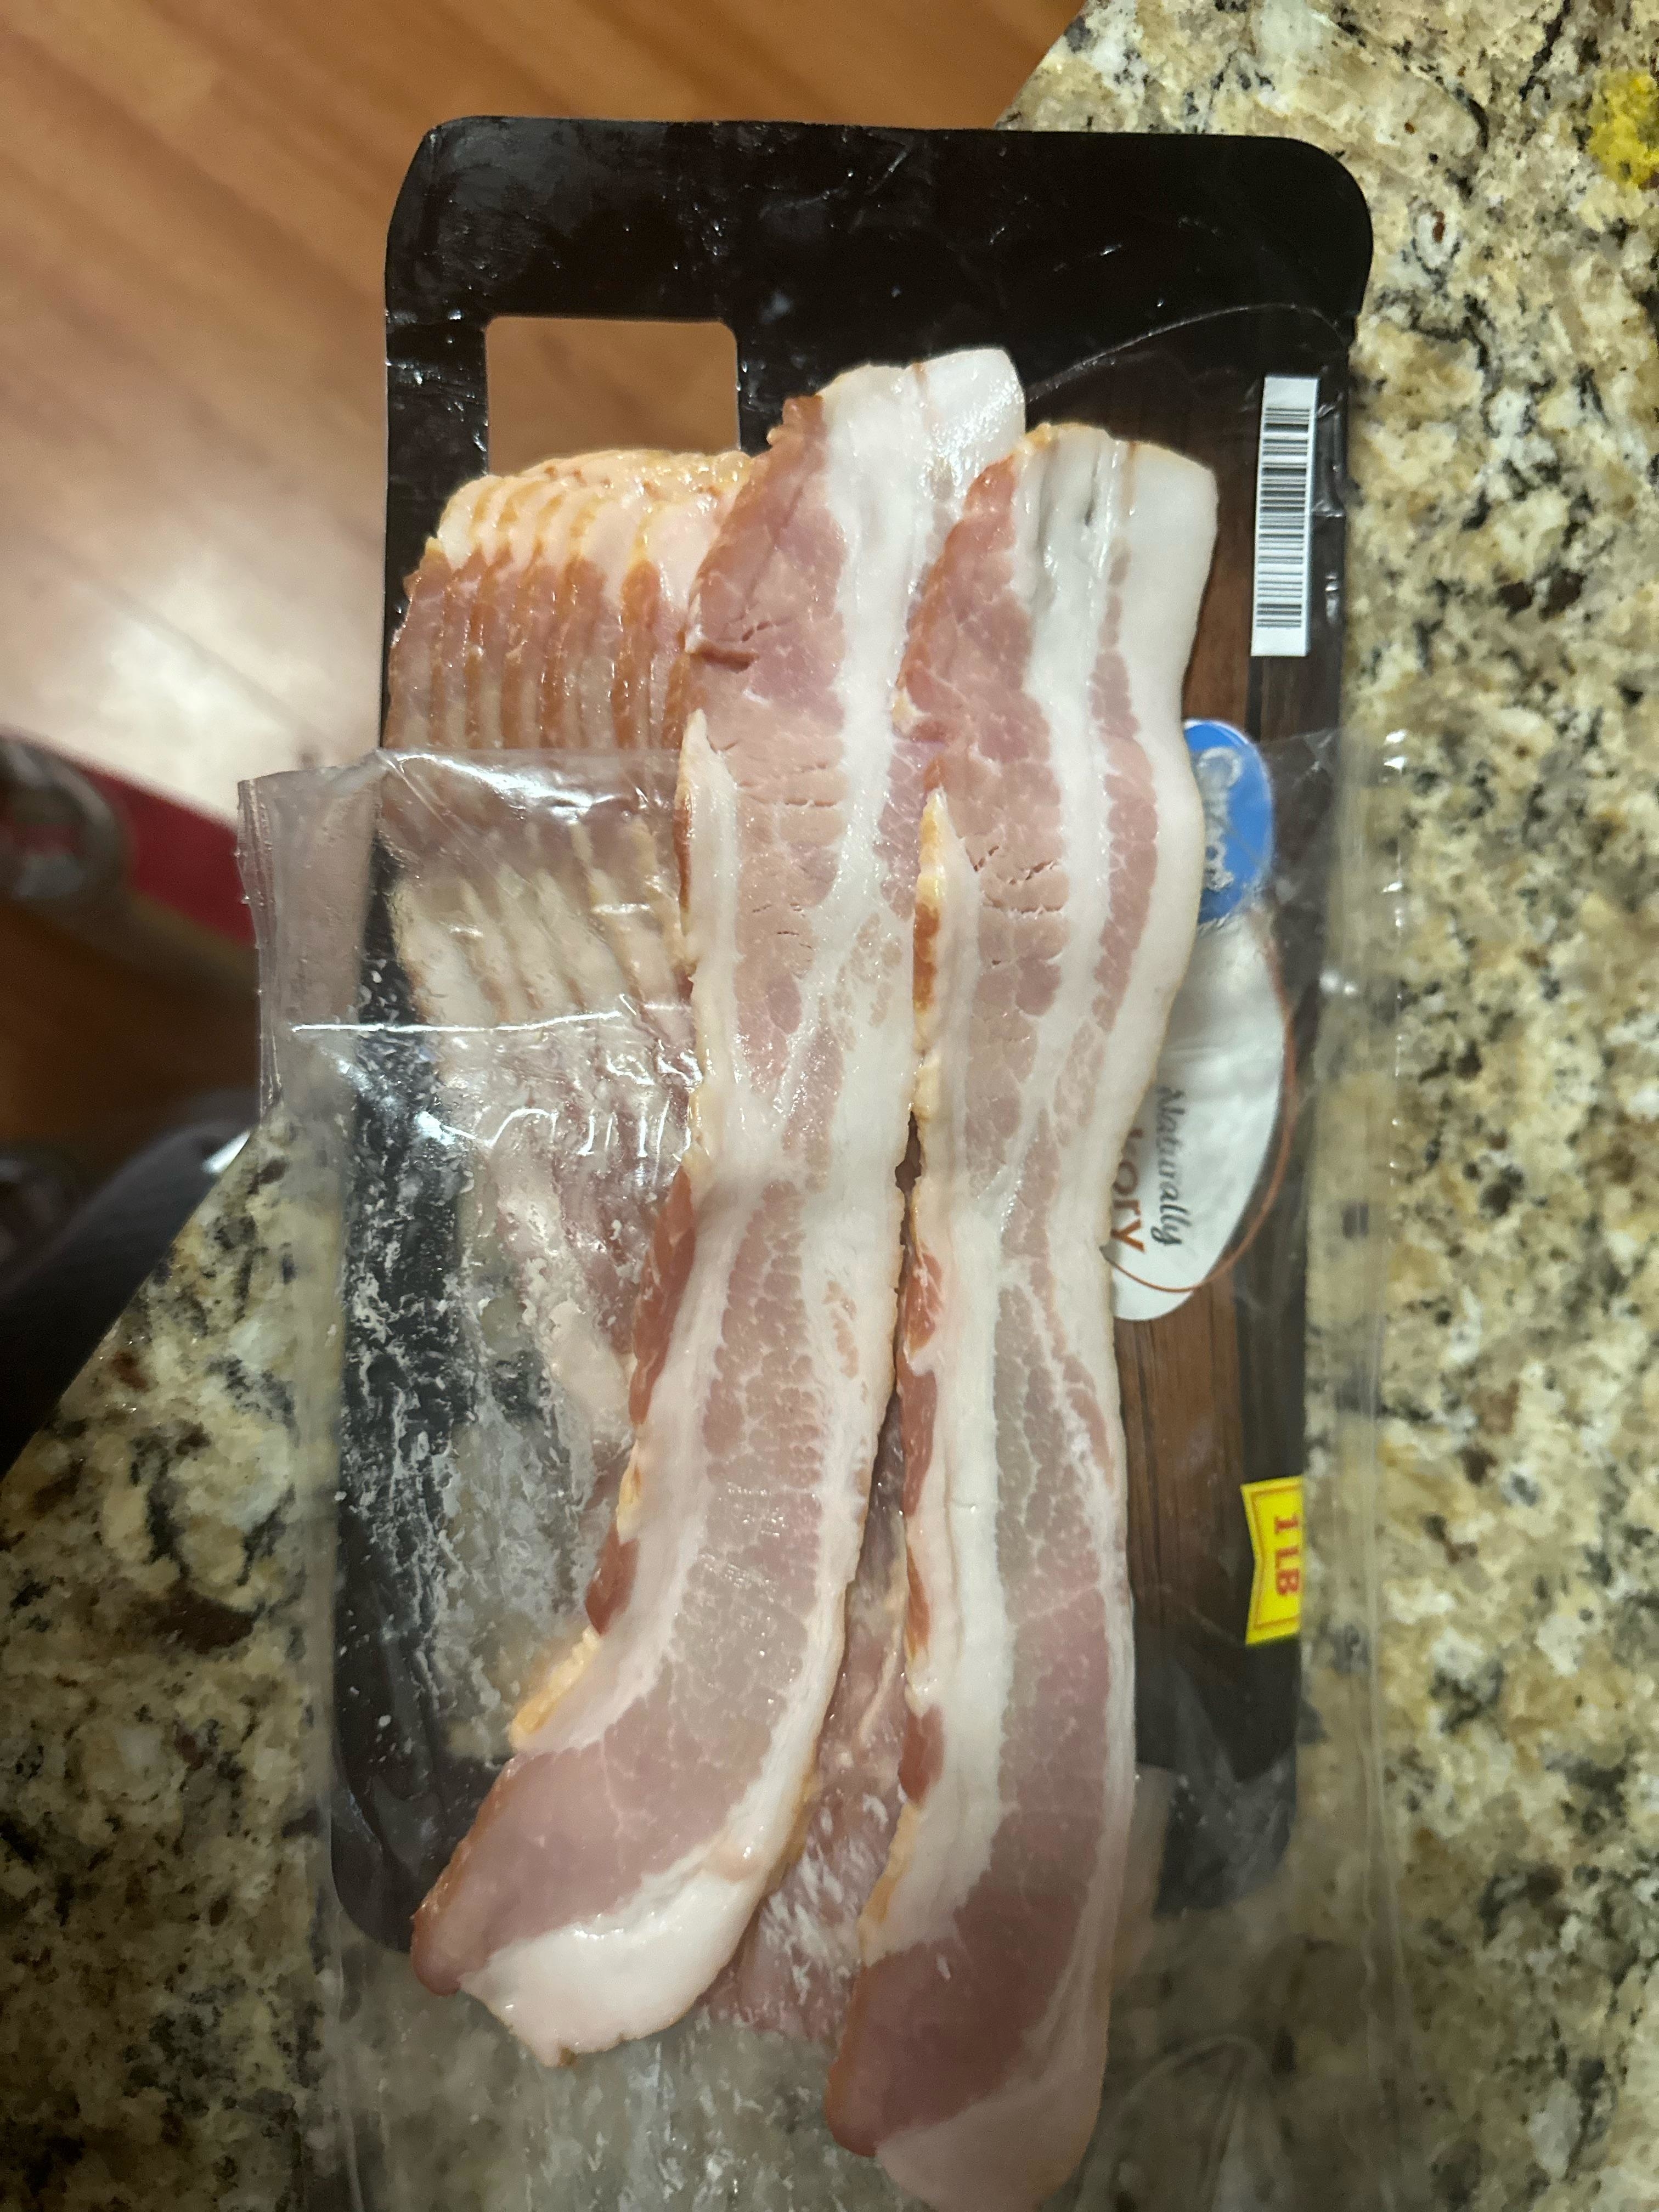 Strips of bacon out of the packaging